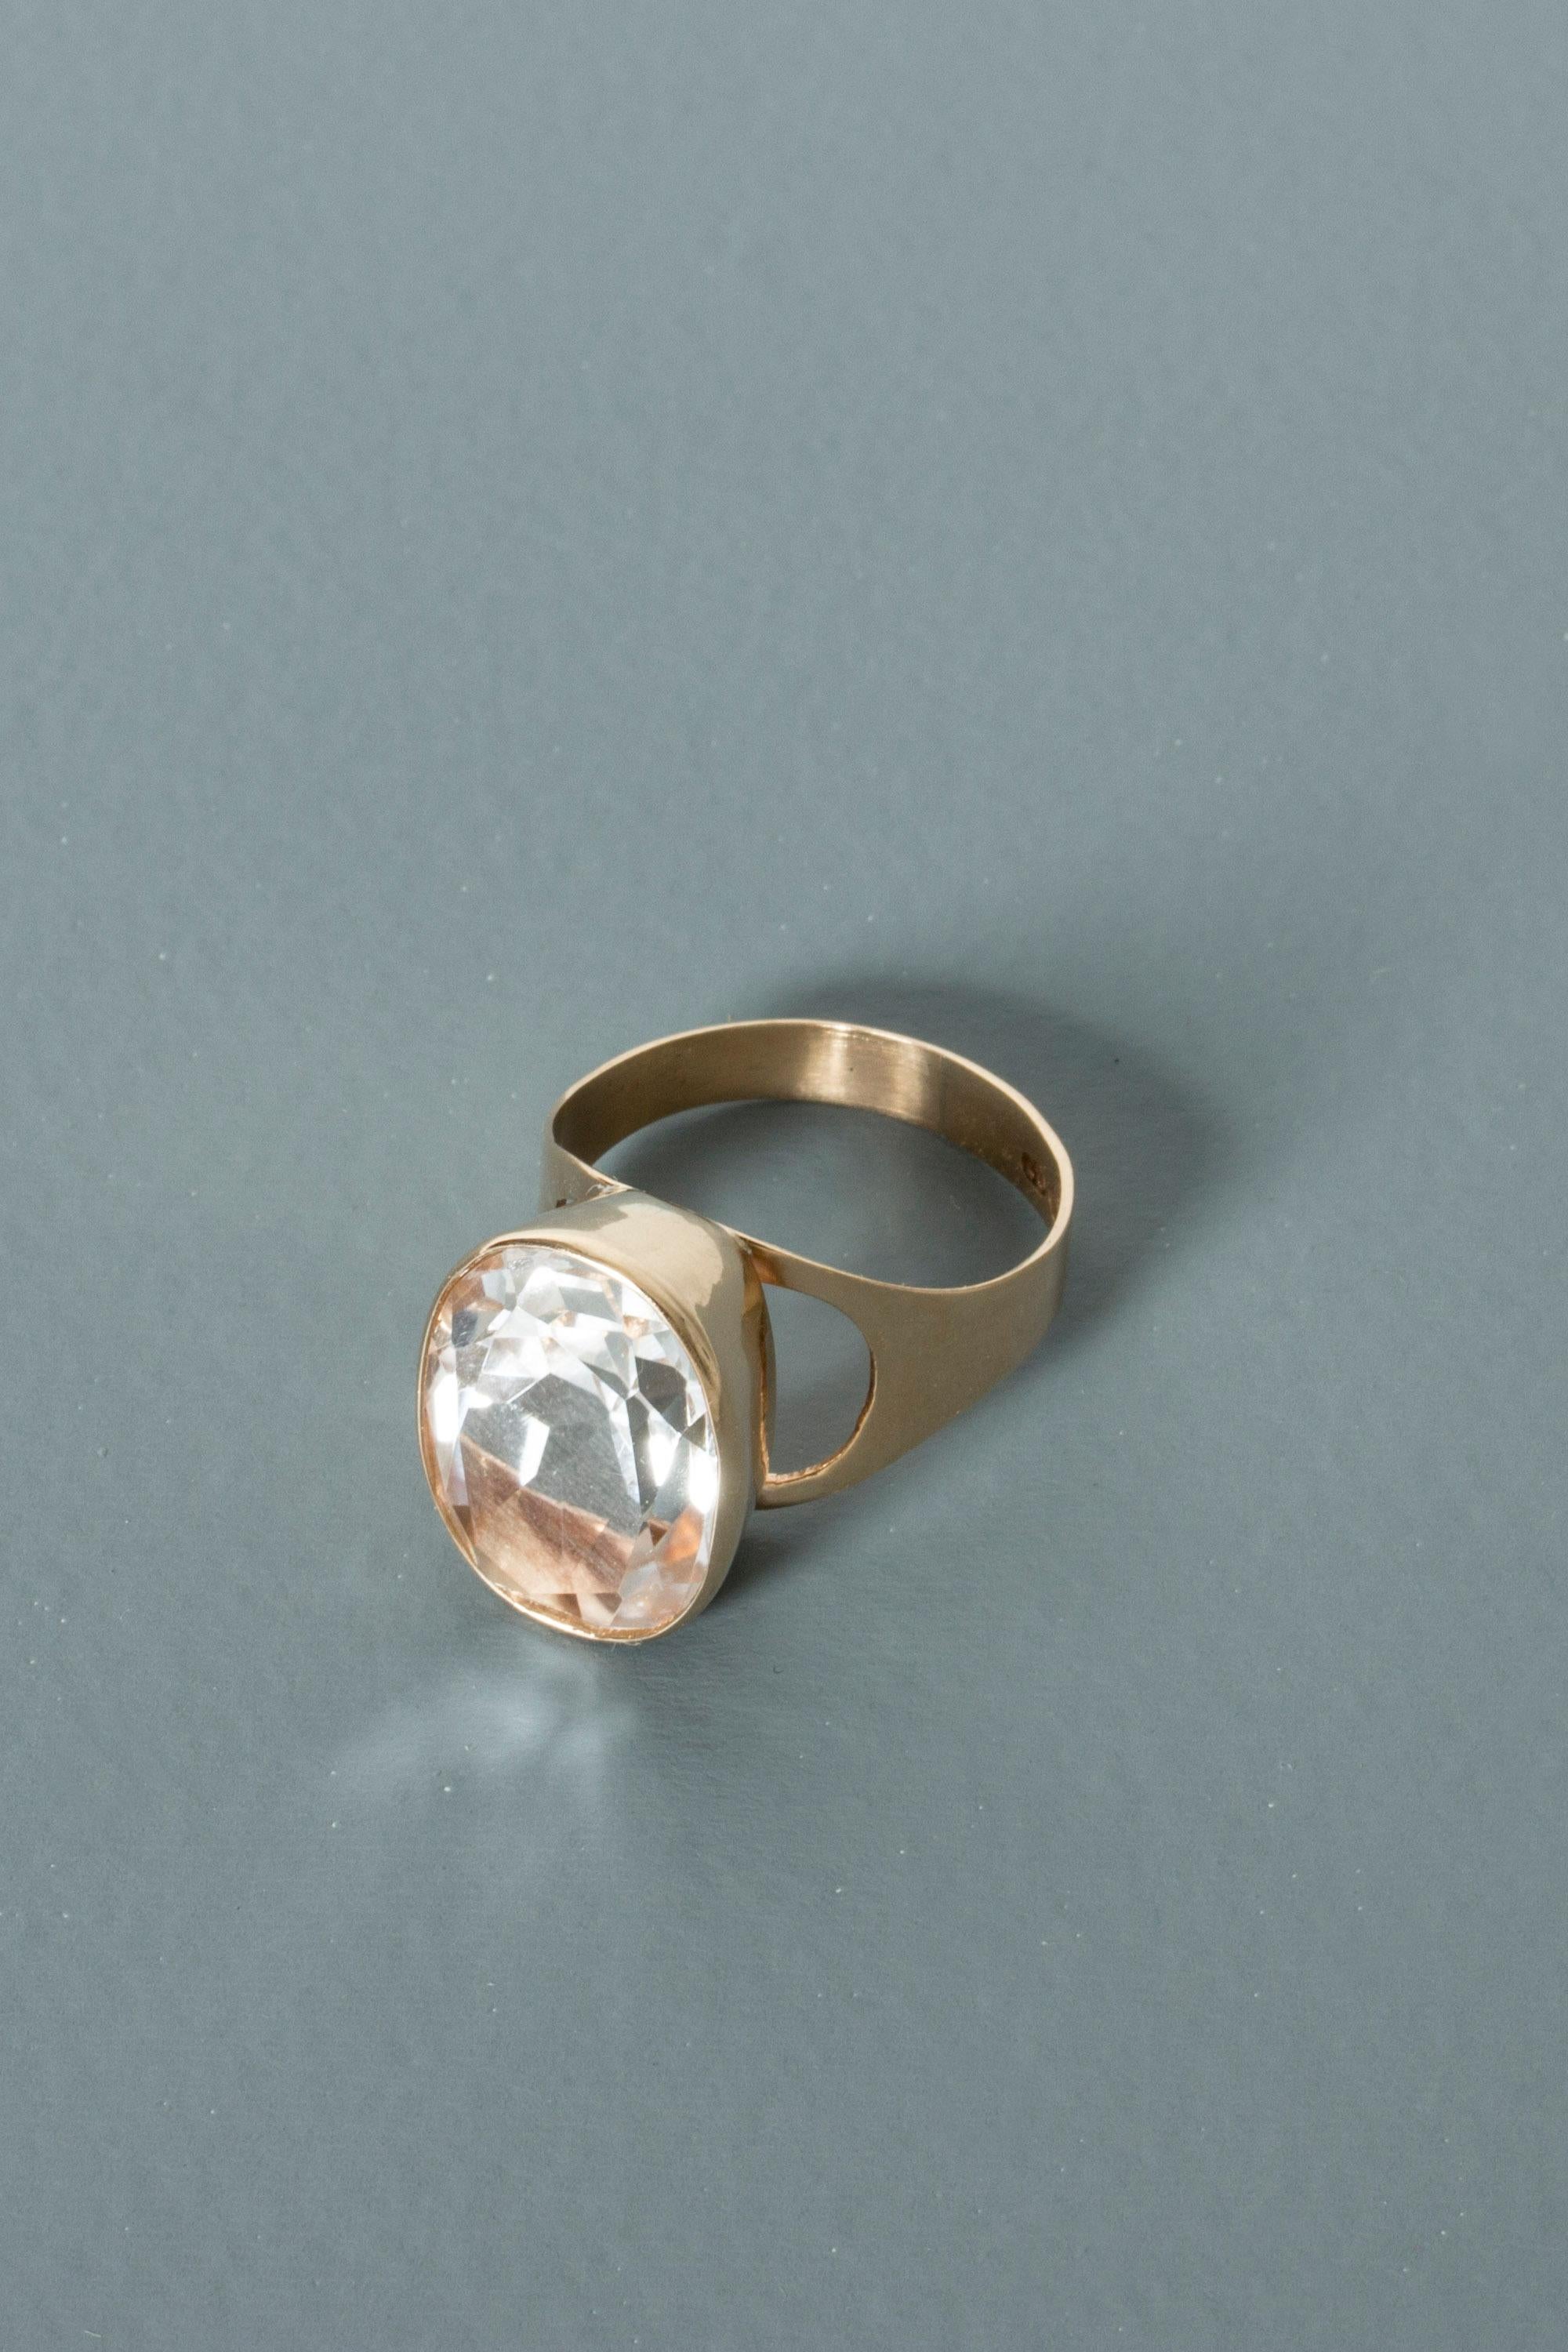 Beautiful gold ring by Tauno Suhonen, with a brilliant, oval rock crystal. The frame has elegant openings on the sides to let the light in.
